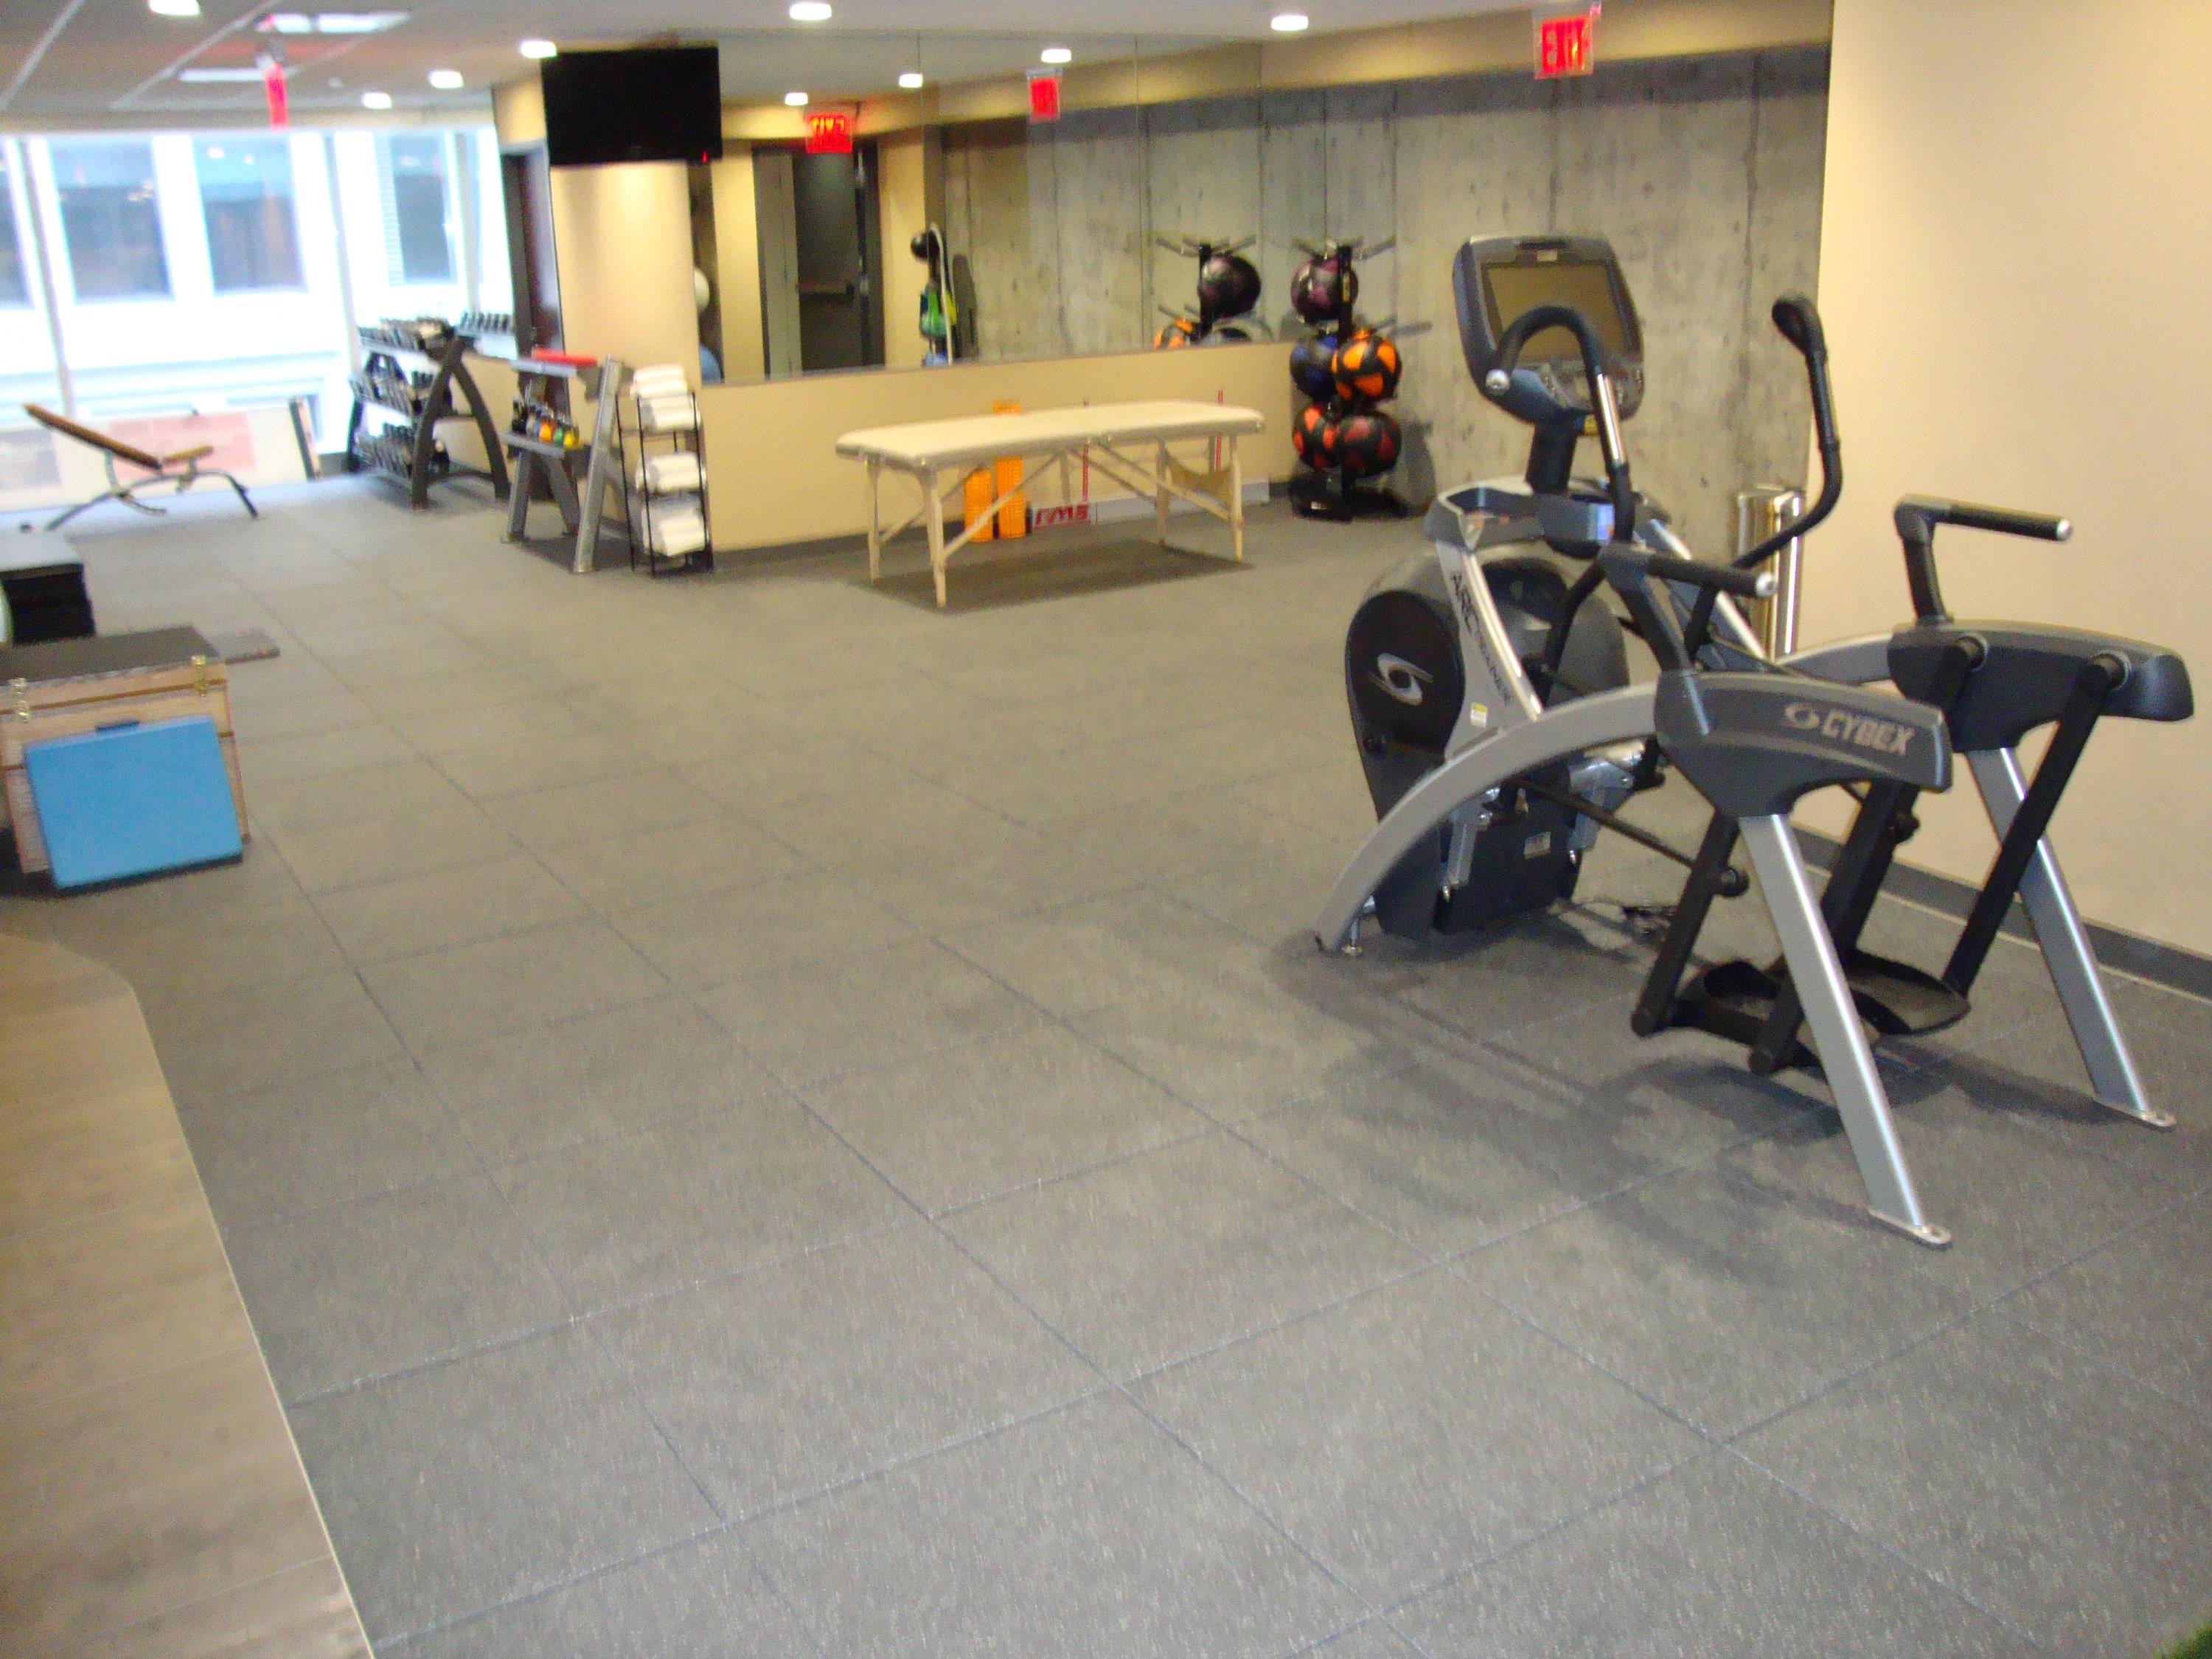 Gym flooring at this commercial high-rise building in NYC